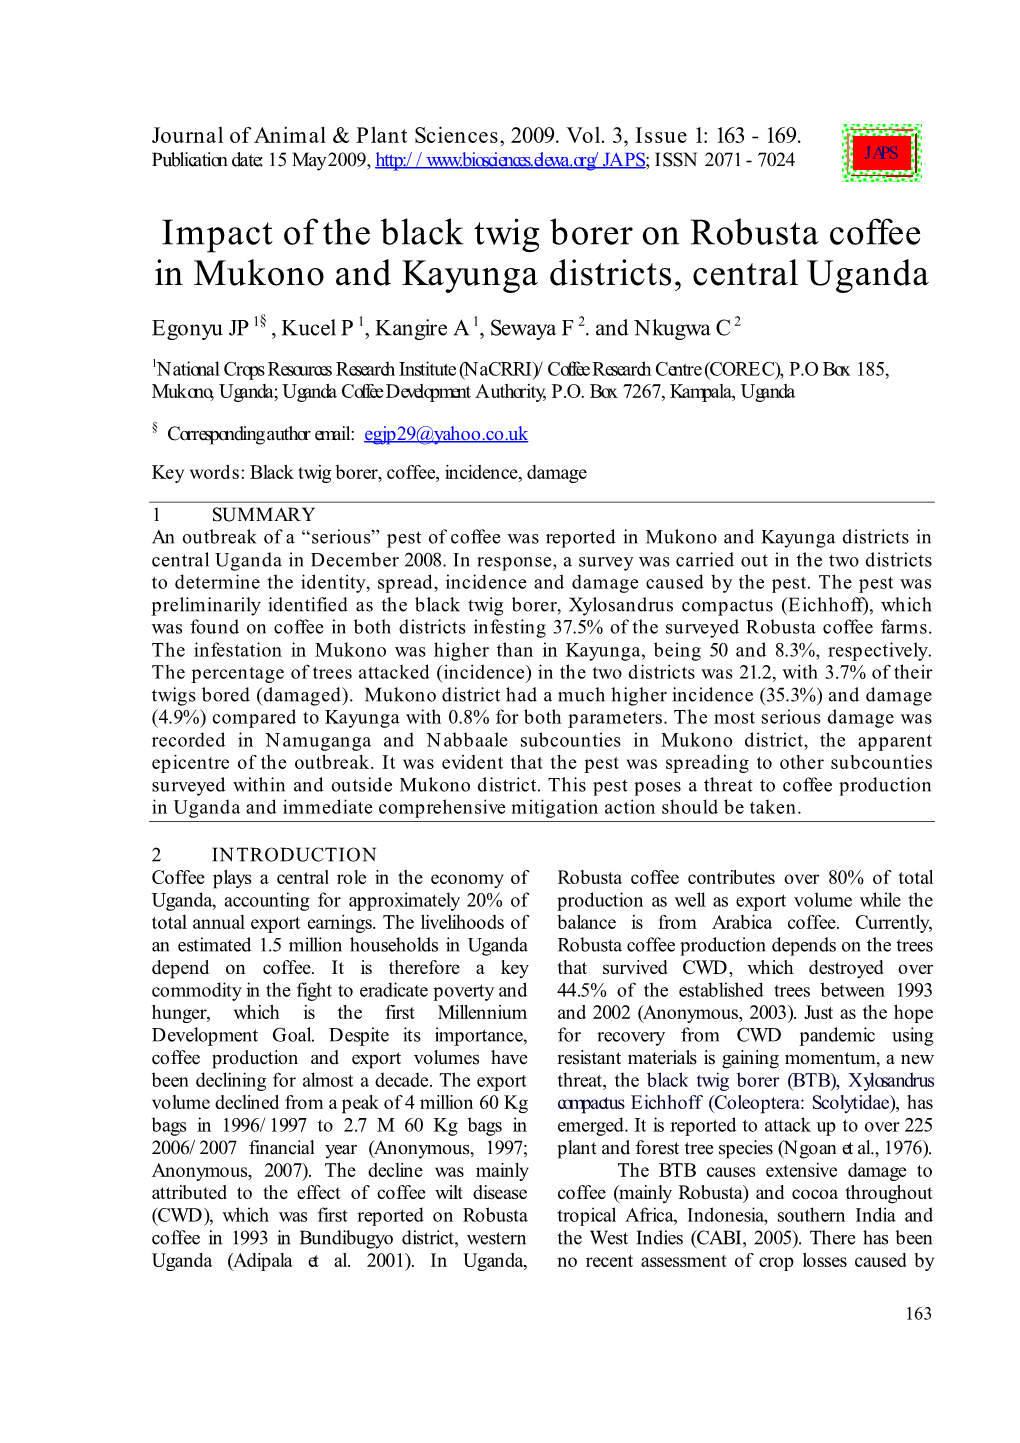 Impact of the Black Twig Borer on Robusta Coffee in Mukono and Kayunga Districts, Central Uganda